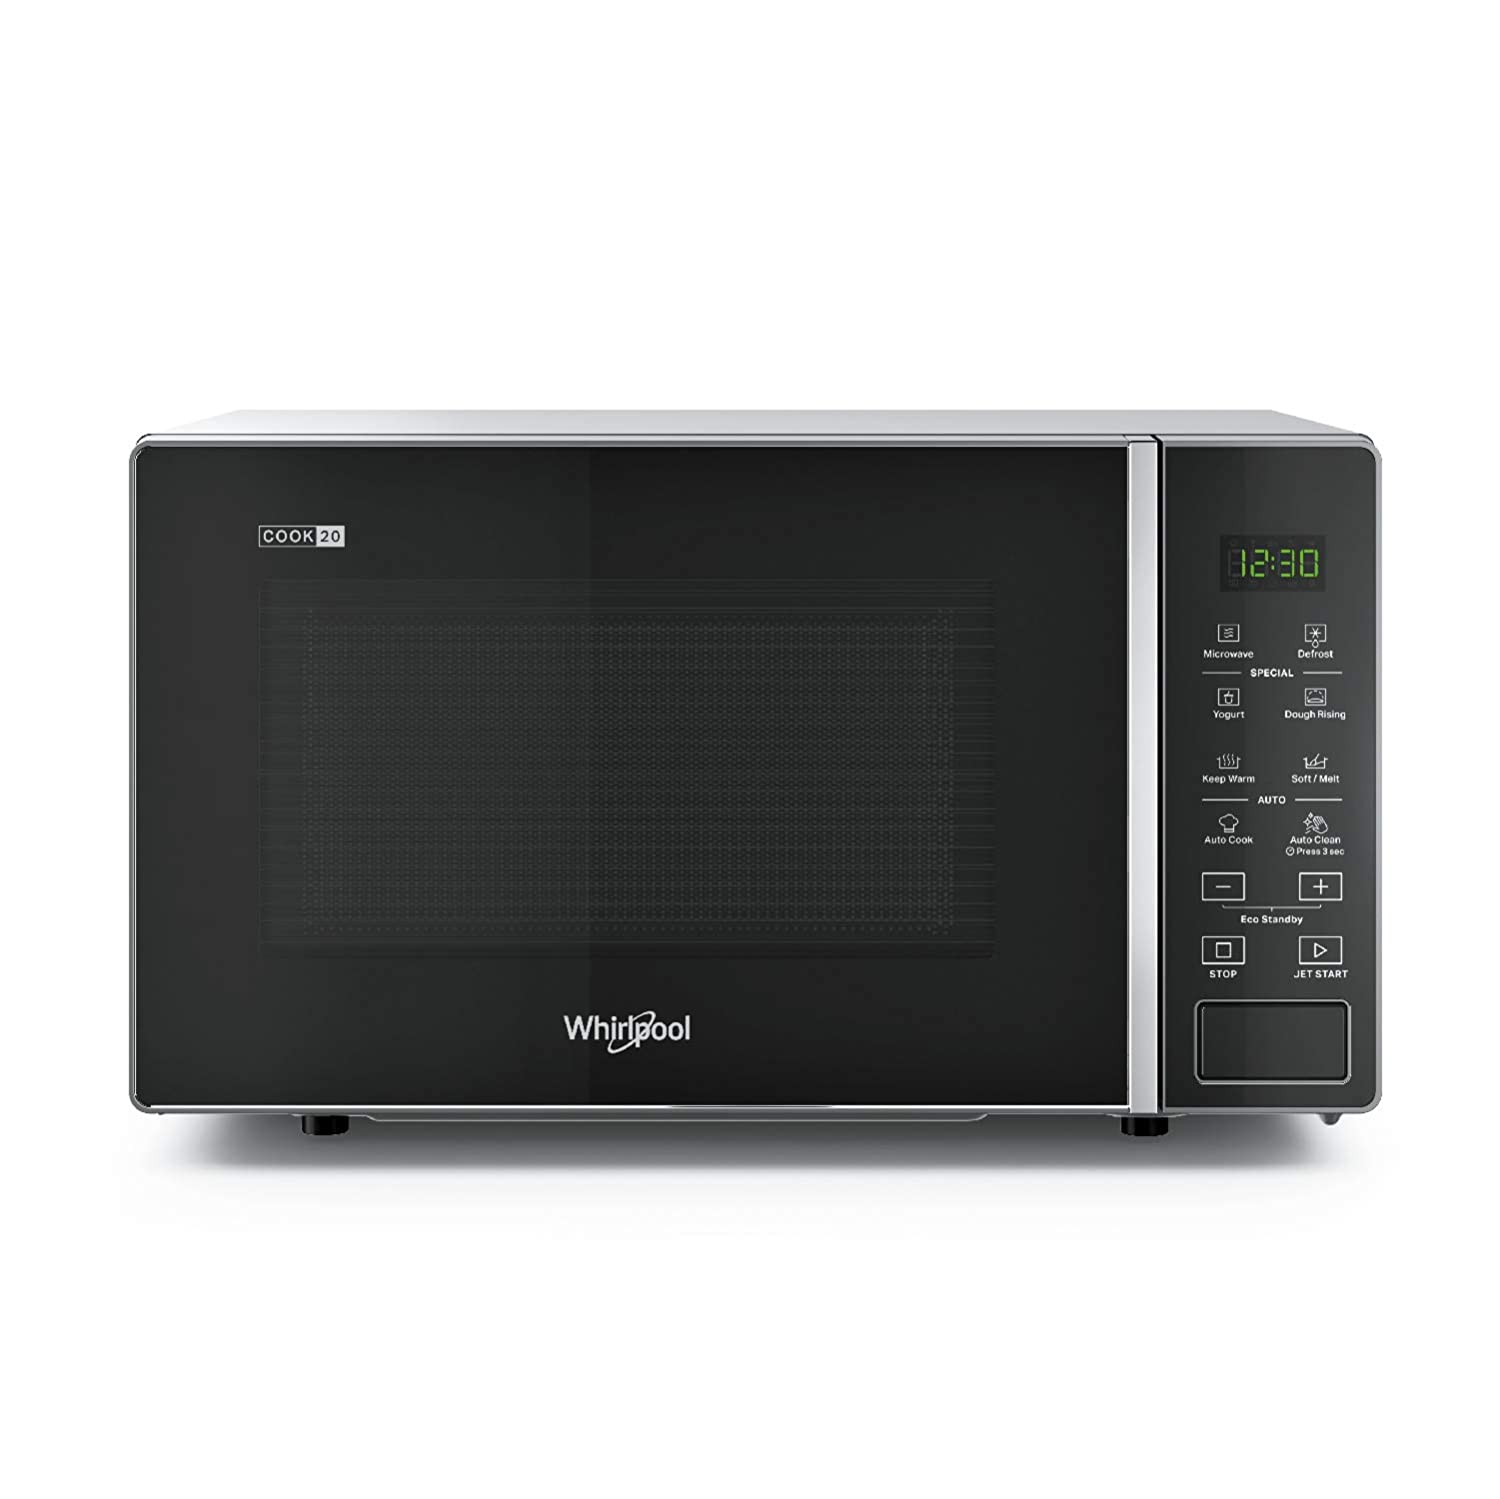 WHIRLPOOL - MICROWAVE OVEN 50004MAGICOOK 20 LTR